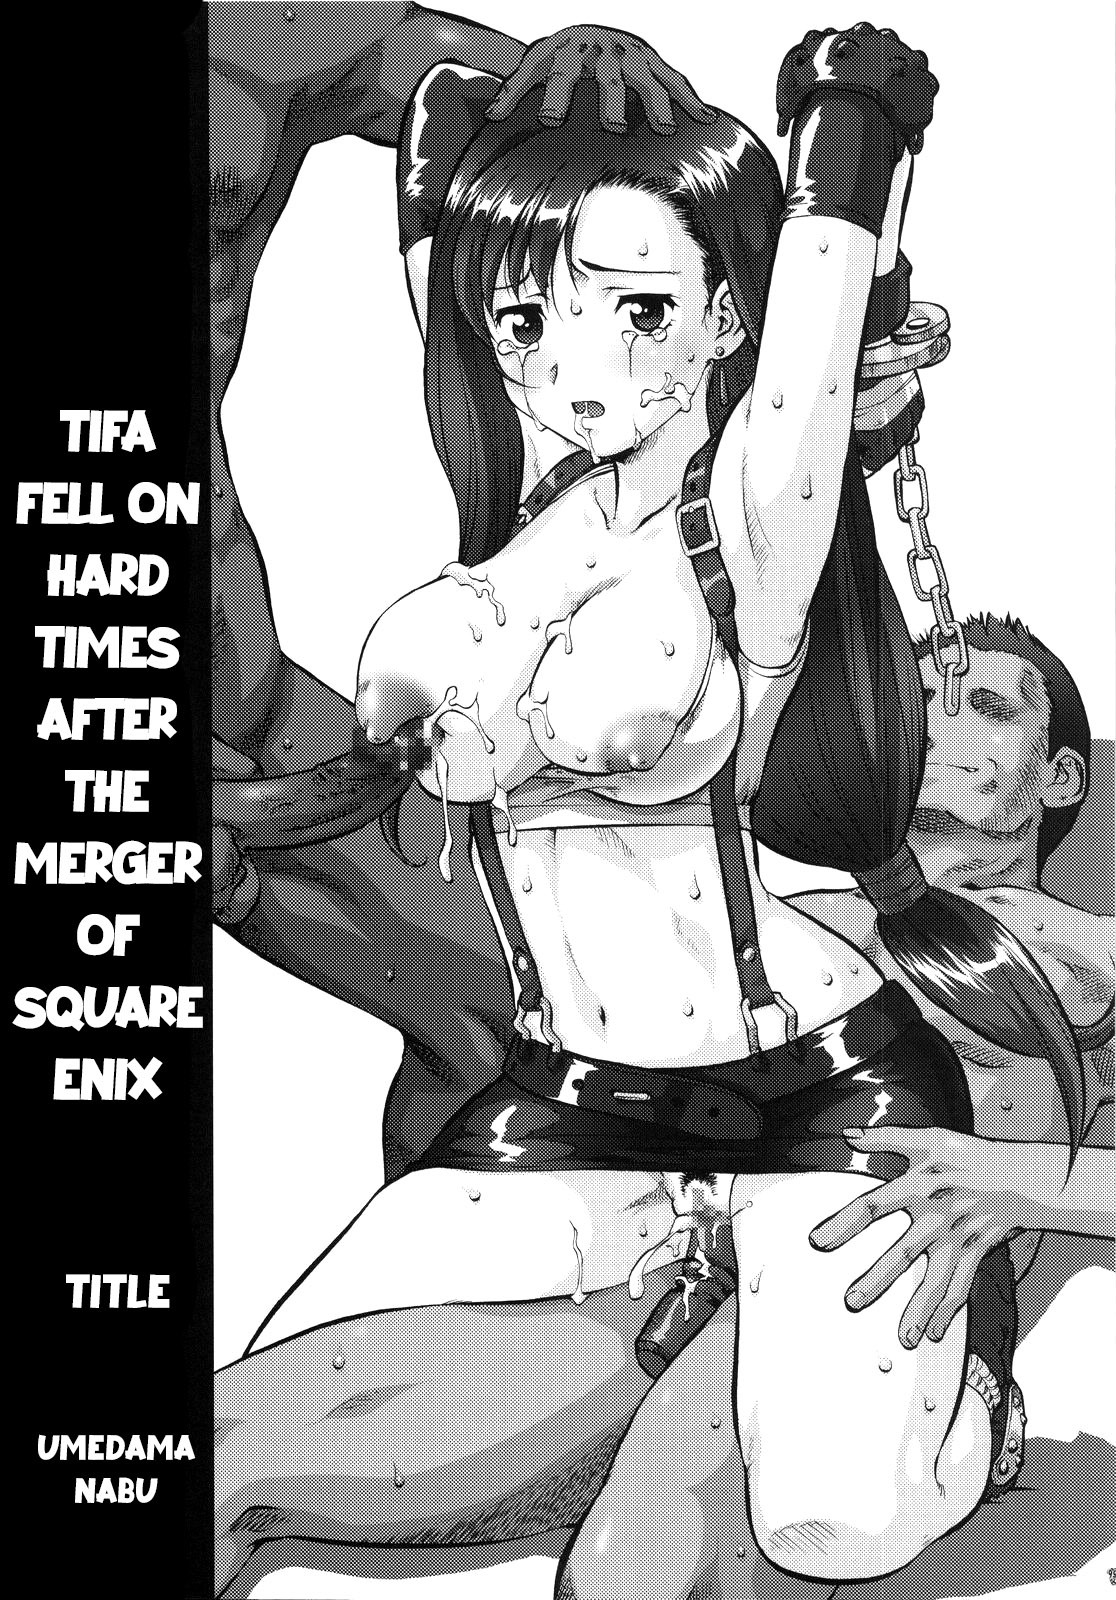 Hentai Manga Comic-Tifa Fell On Hard Times After The Merger of Squeenix-Read-1